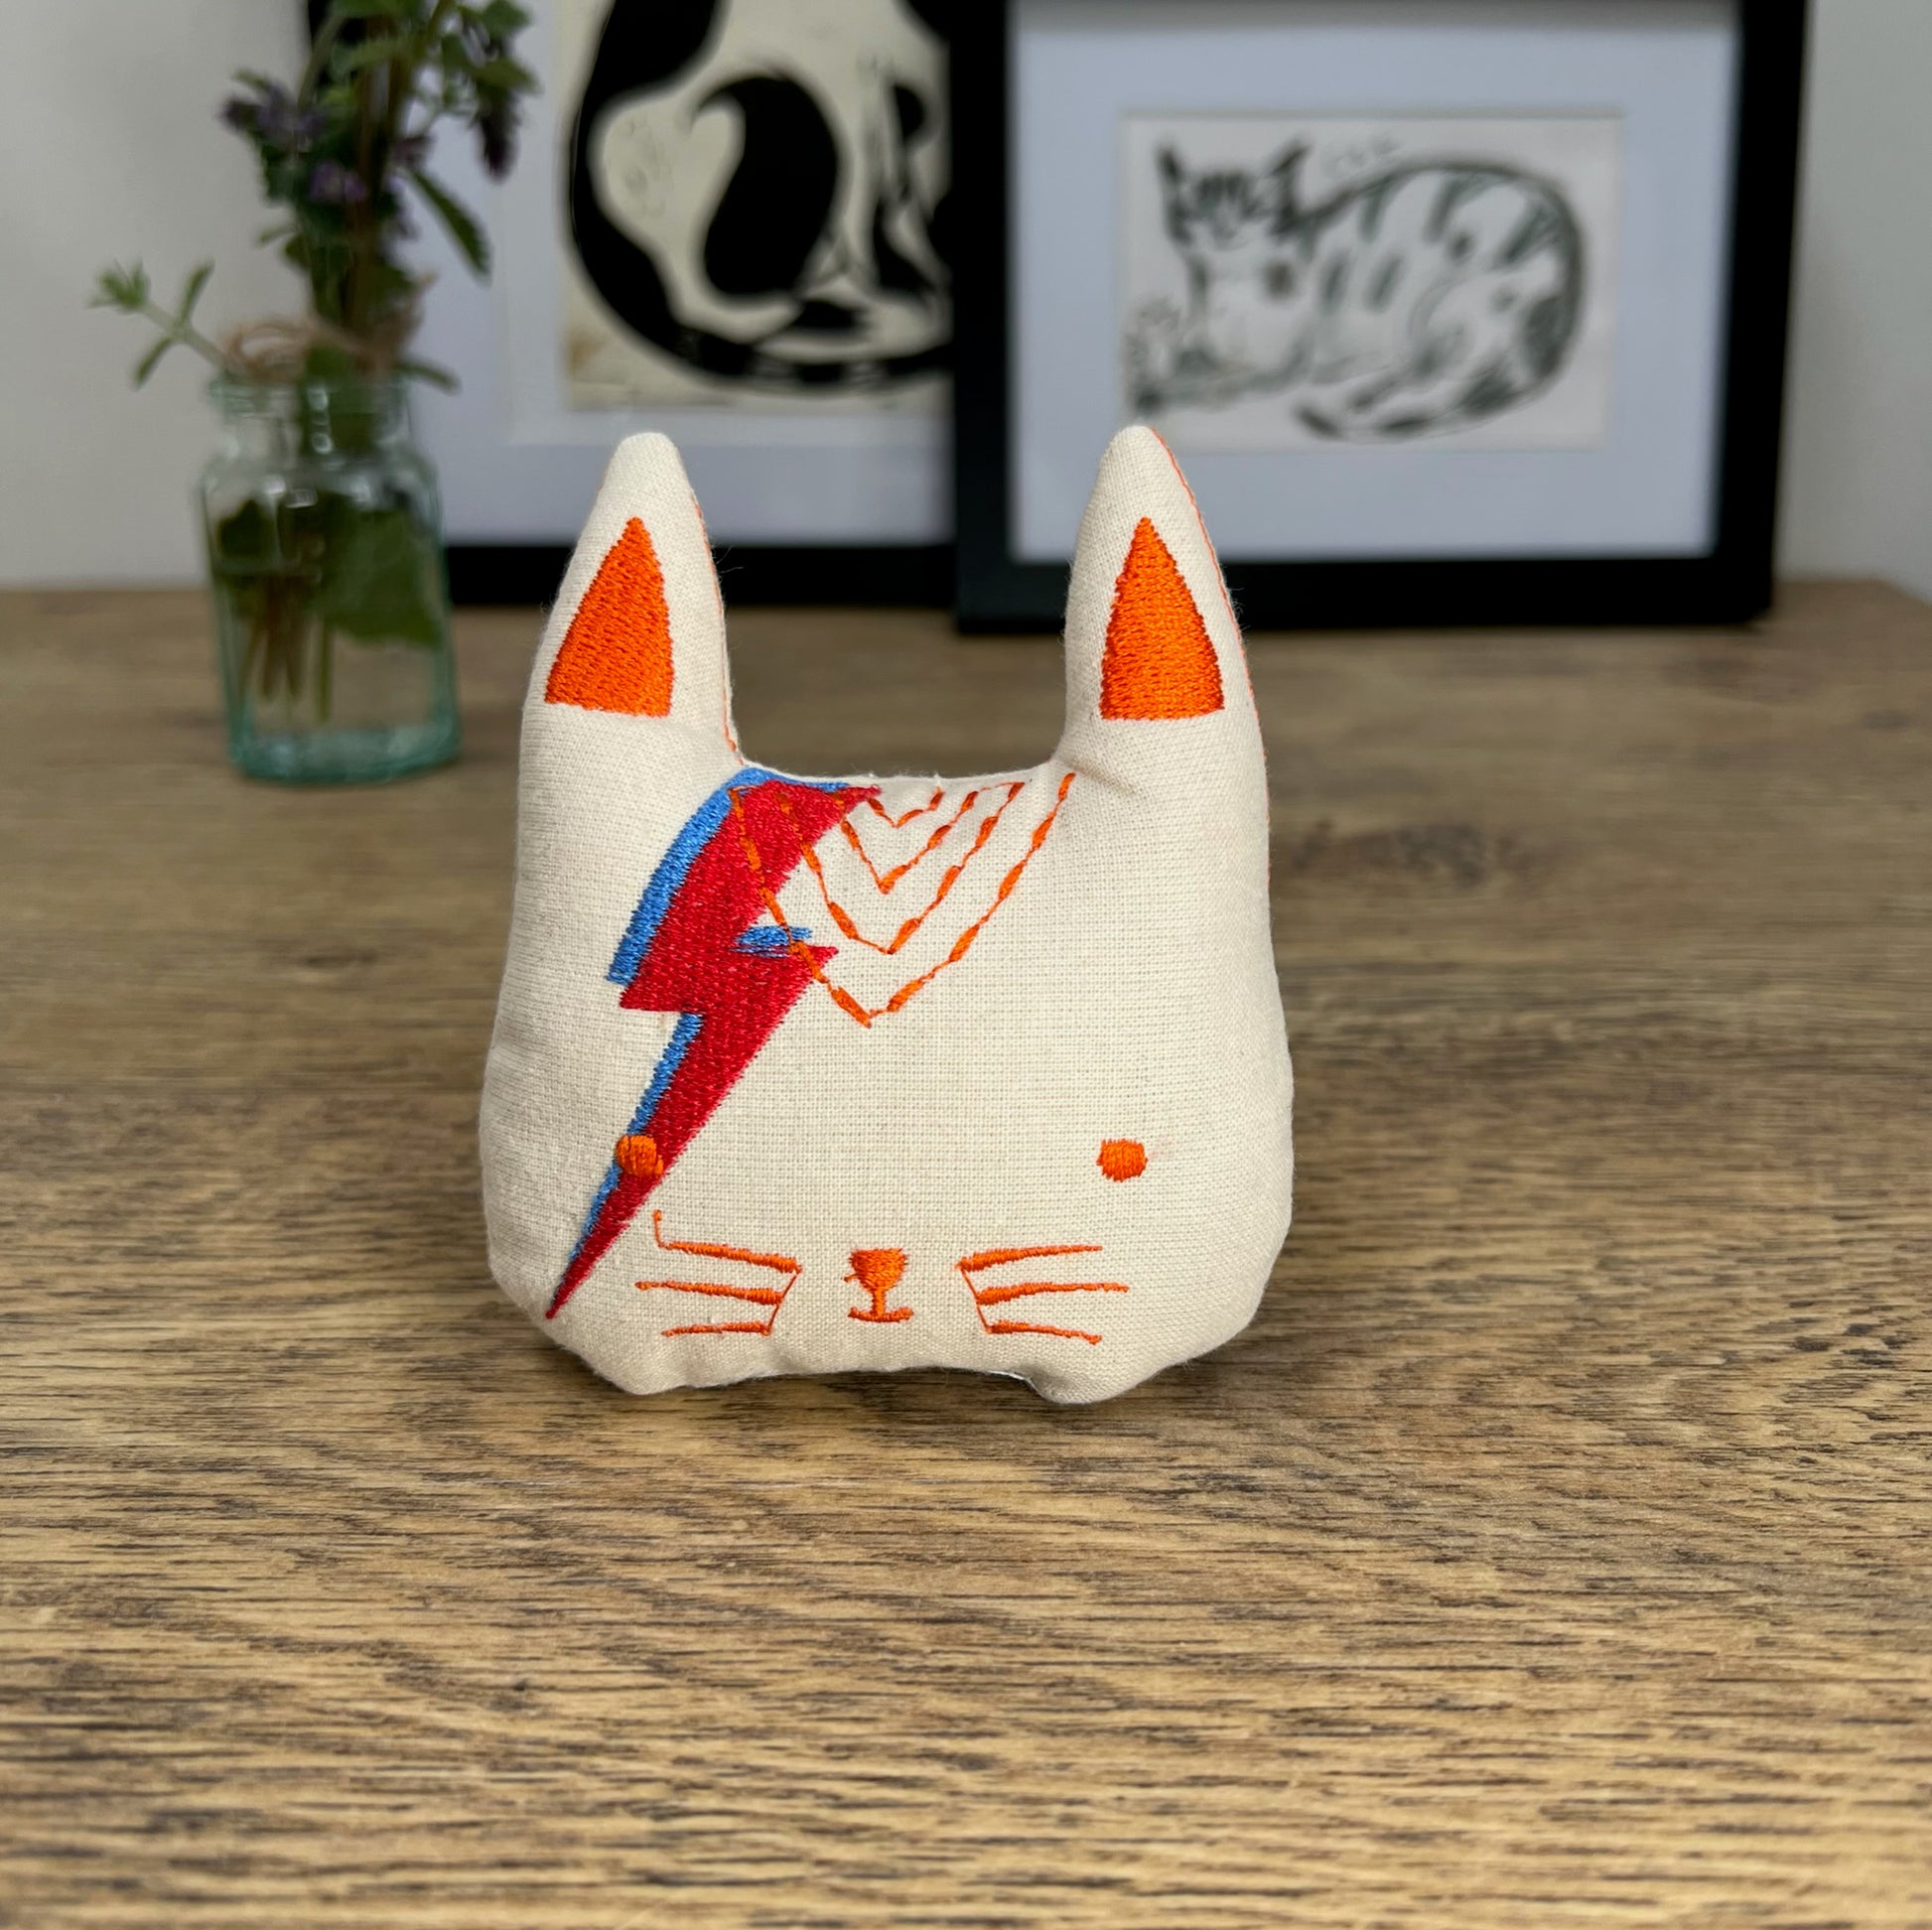 Freak Meowt Luxury Cat Toys, Gifts for Cats David Meow, Handmade in Wales